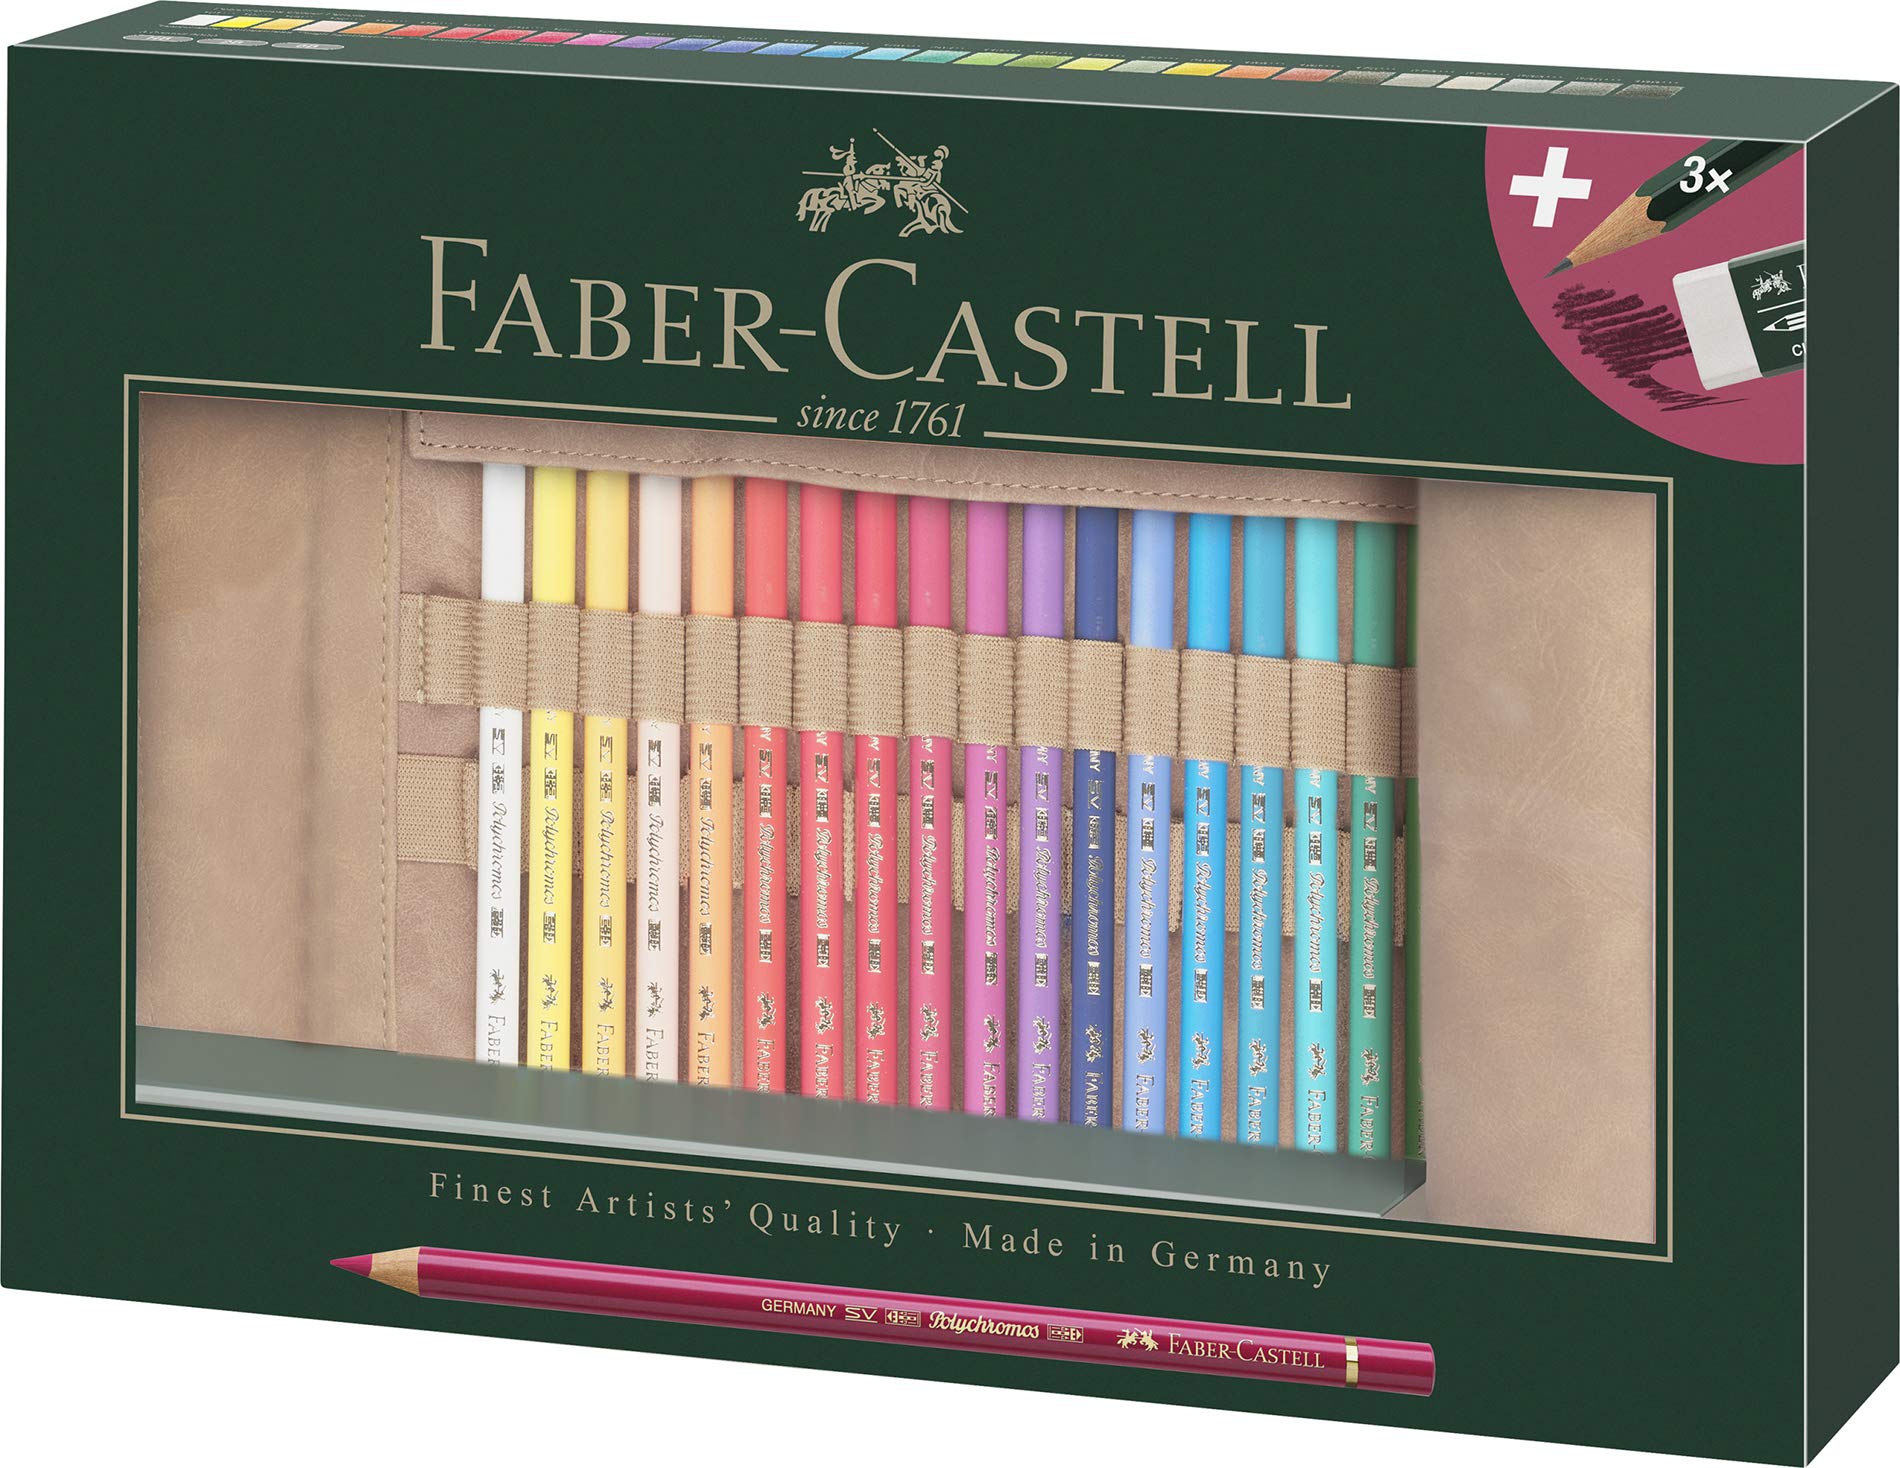 Faber-Castell 110030 Polychromos Coloured Pencils Set of 30 with Leather Pencil Roll and Accessories Waterproof Shatterproof for Professionals and ...